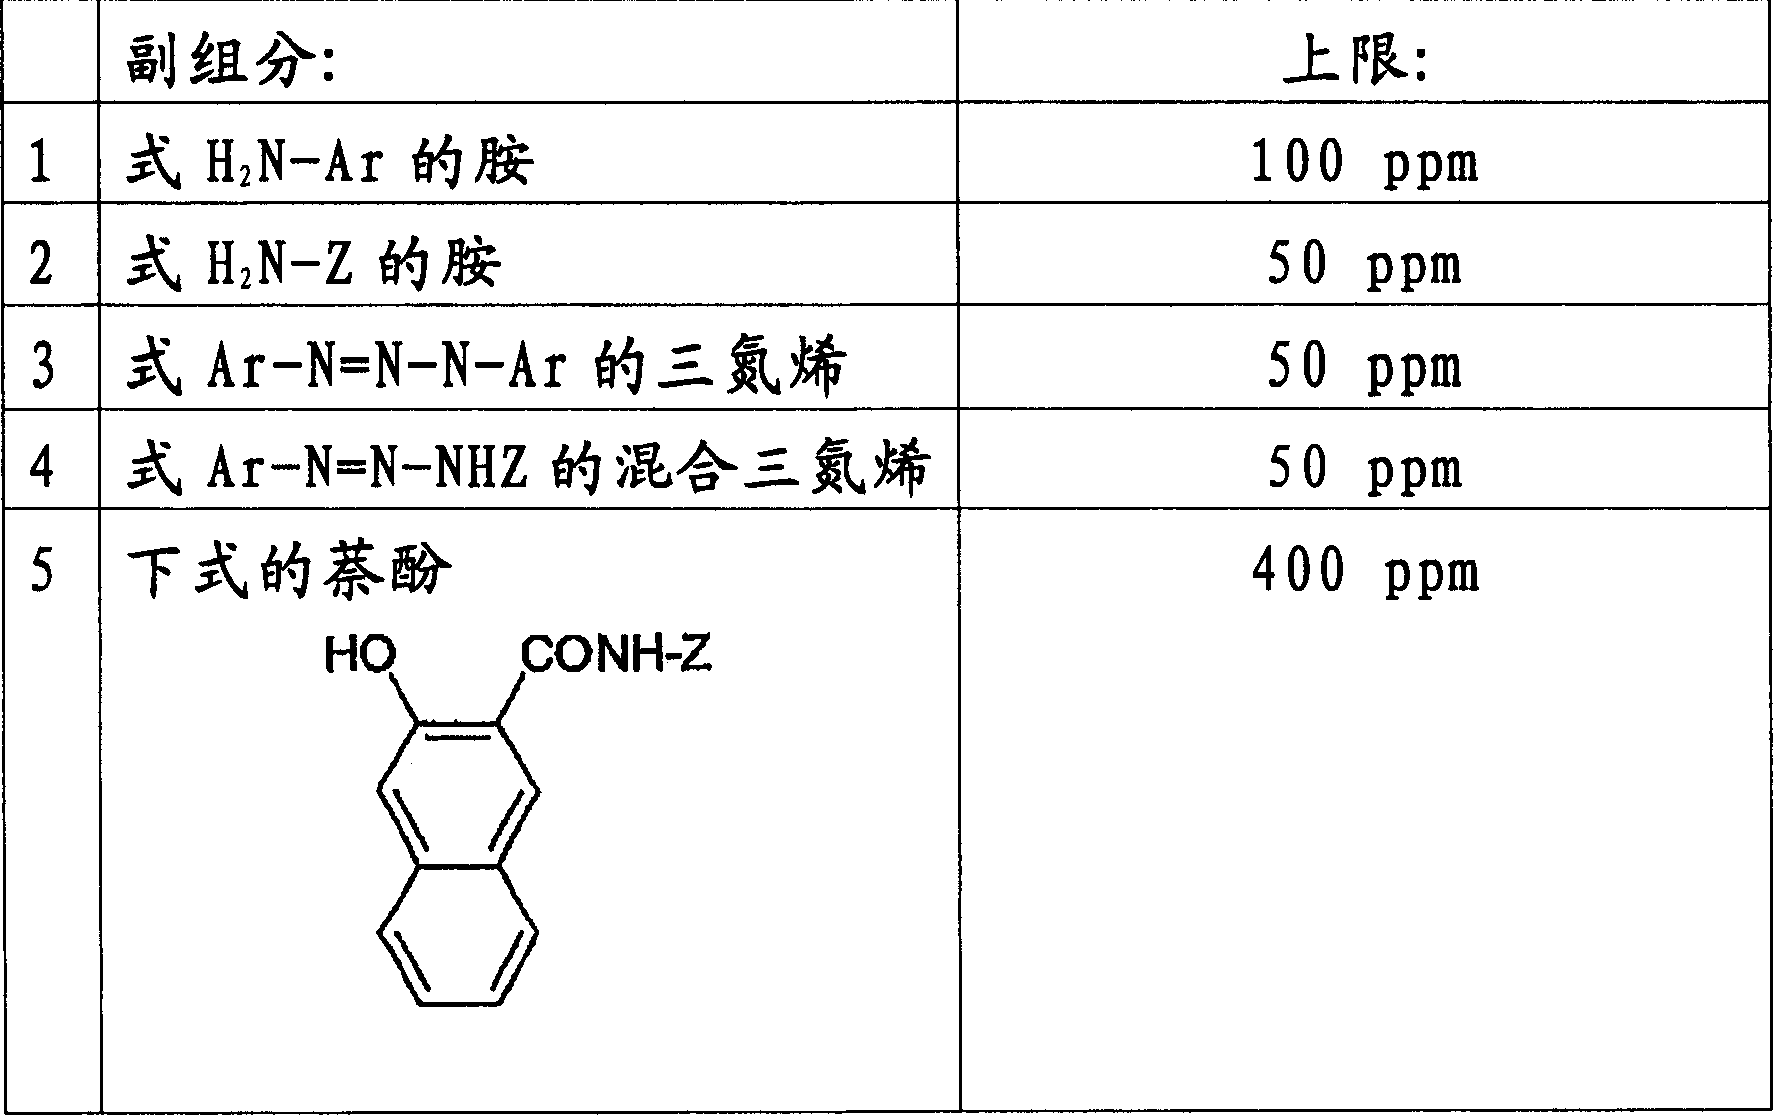 High-purity naphthol as pigments